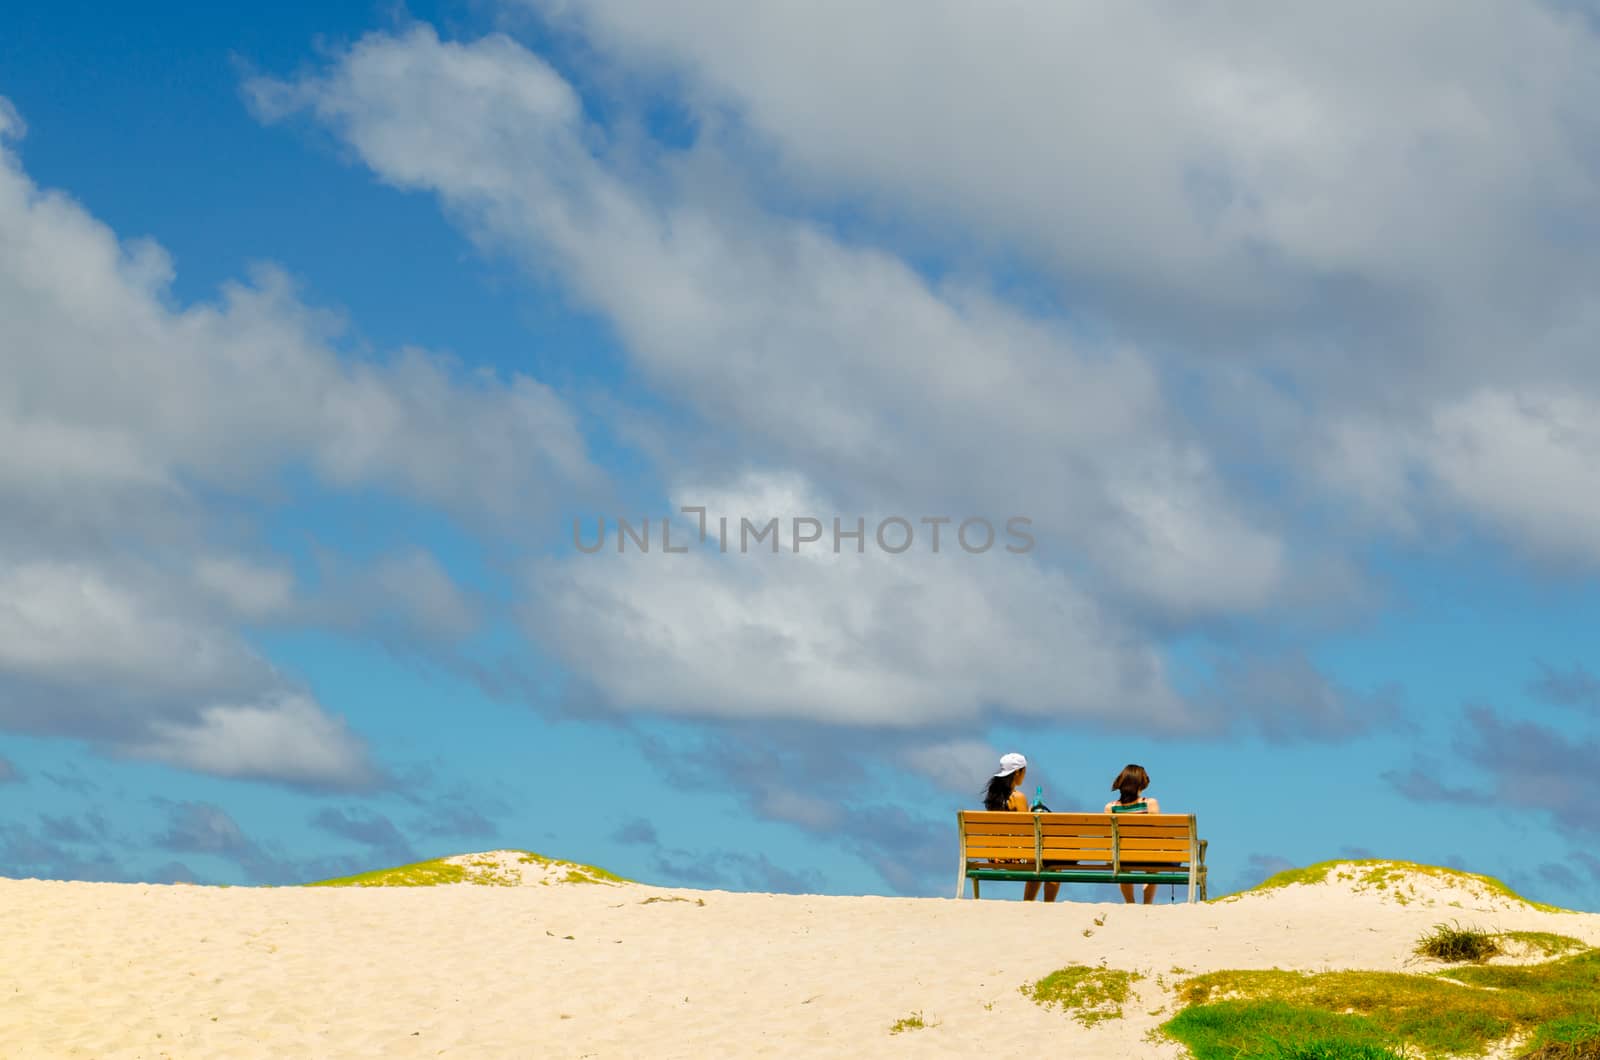 Two girl are sitting on a wooden bank in a Hawaii beach under a cloudy blue sky